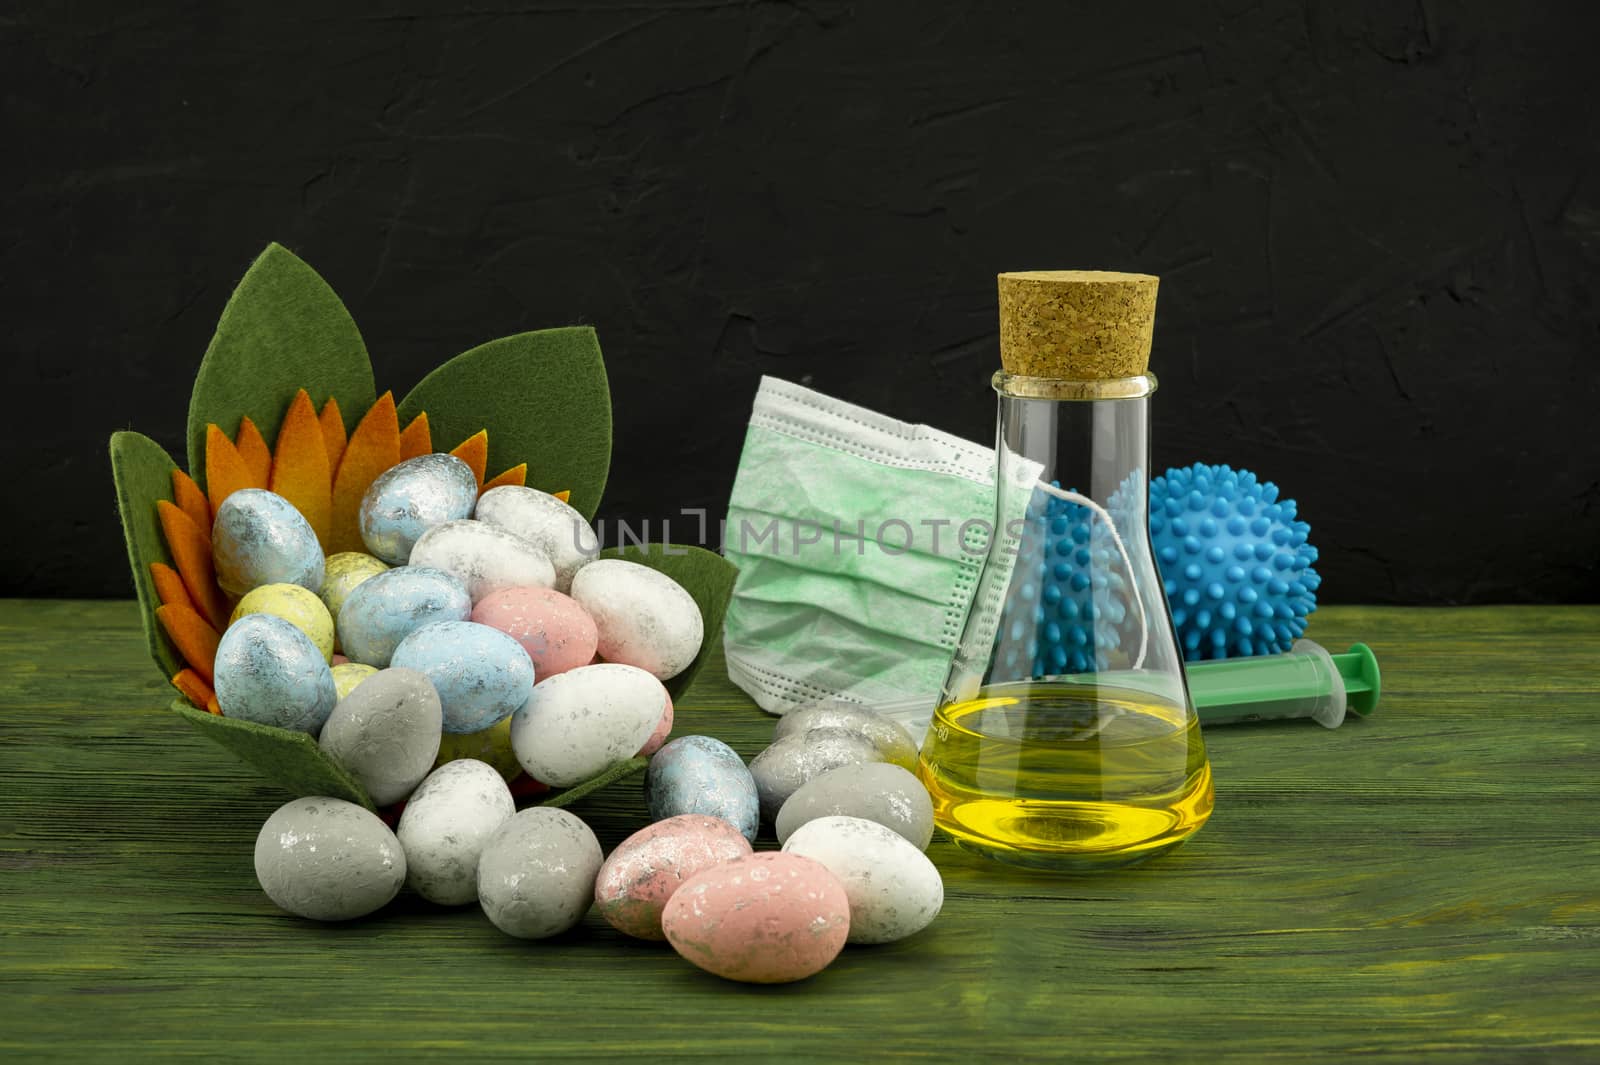 Virus pandemic and celebrating Easter concept with syringe and a protection mask, two blue virus molecules and glass container next to a Easter arrangement with traditional painted eggs